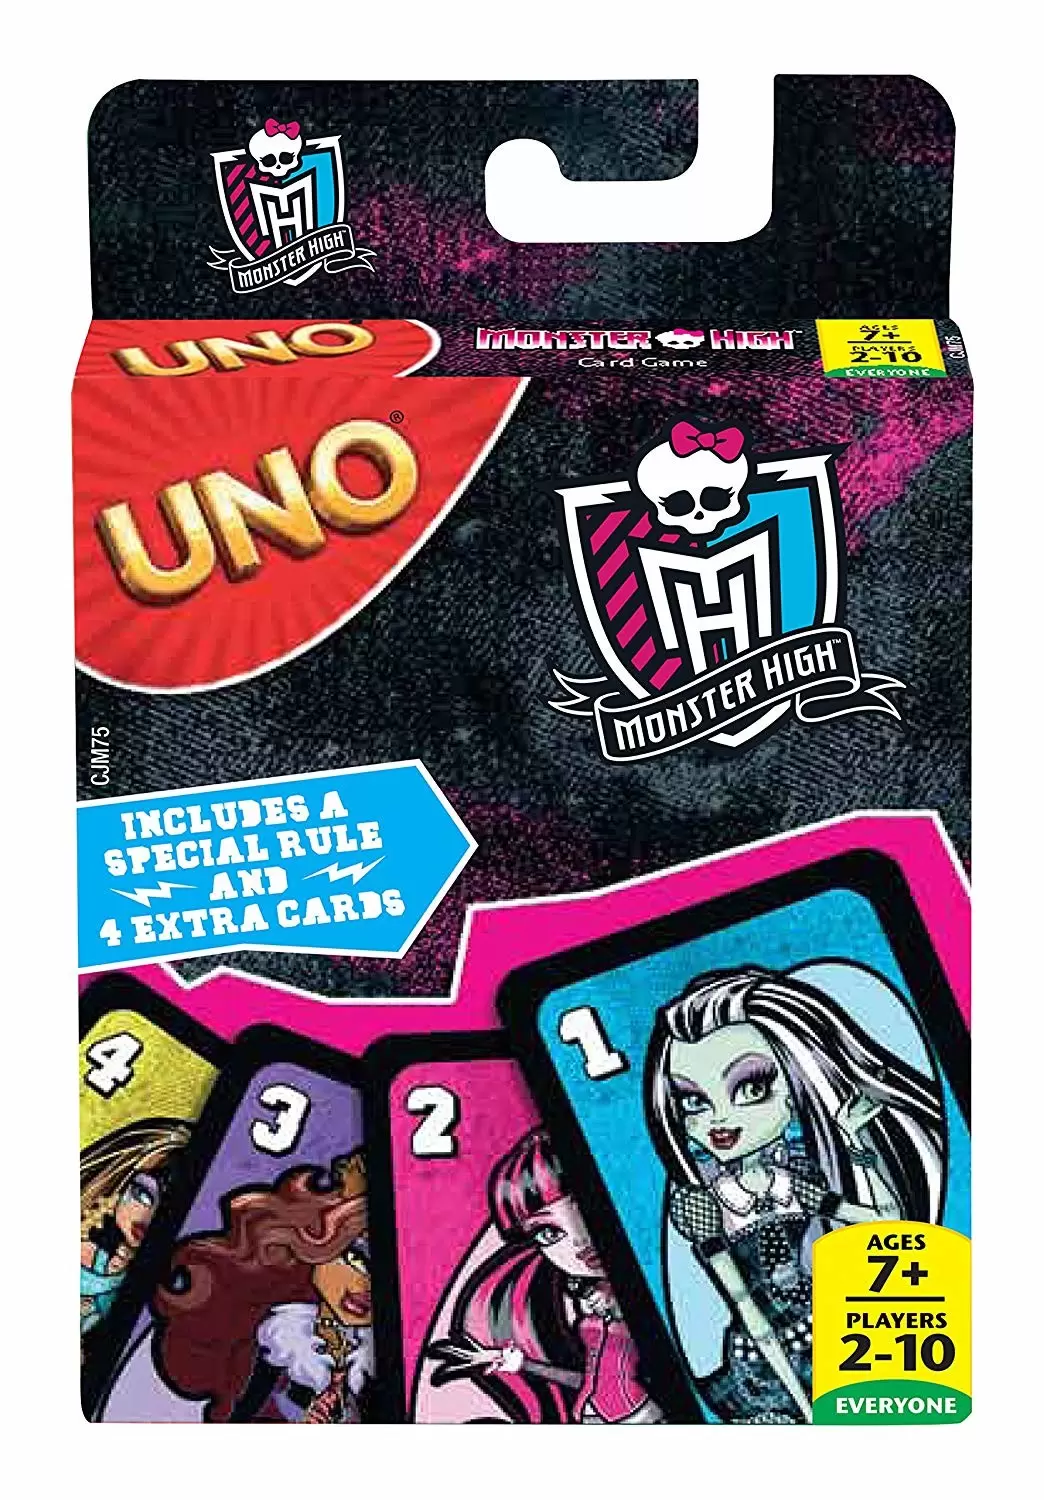 UNO - UNO Monster High